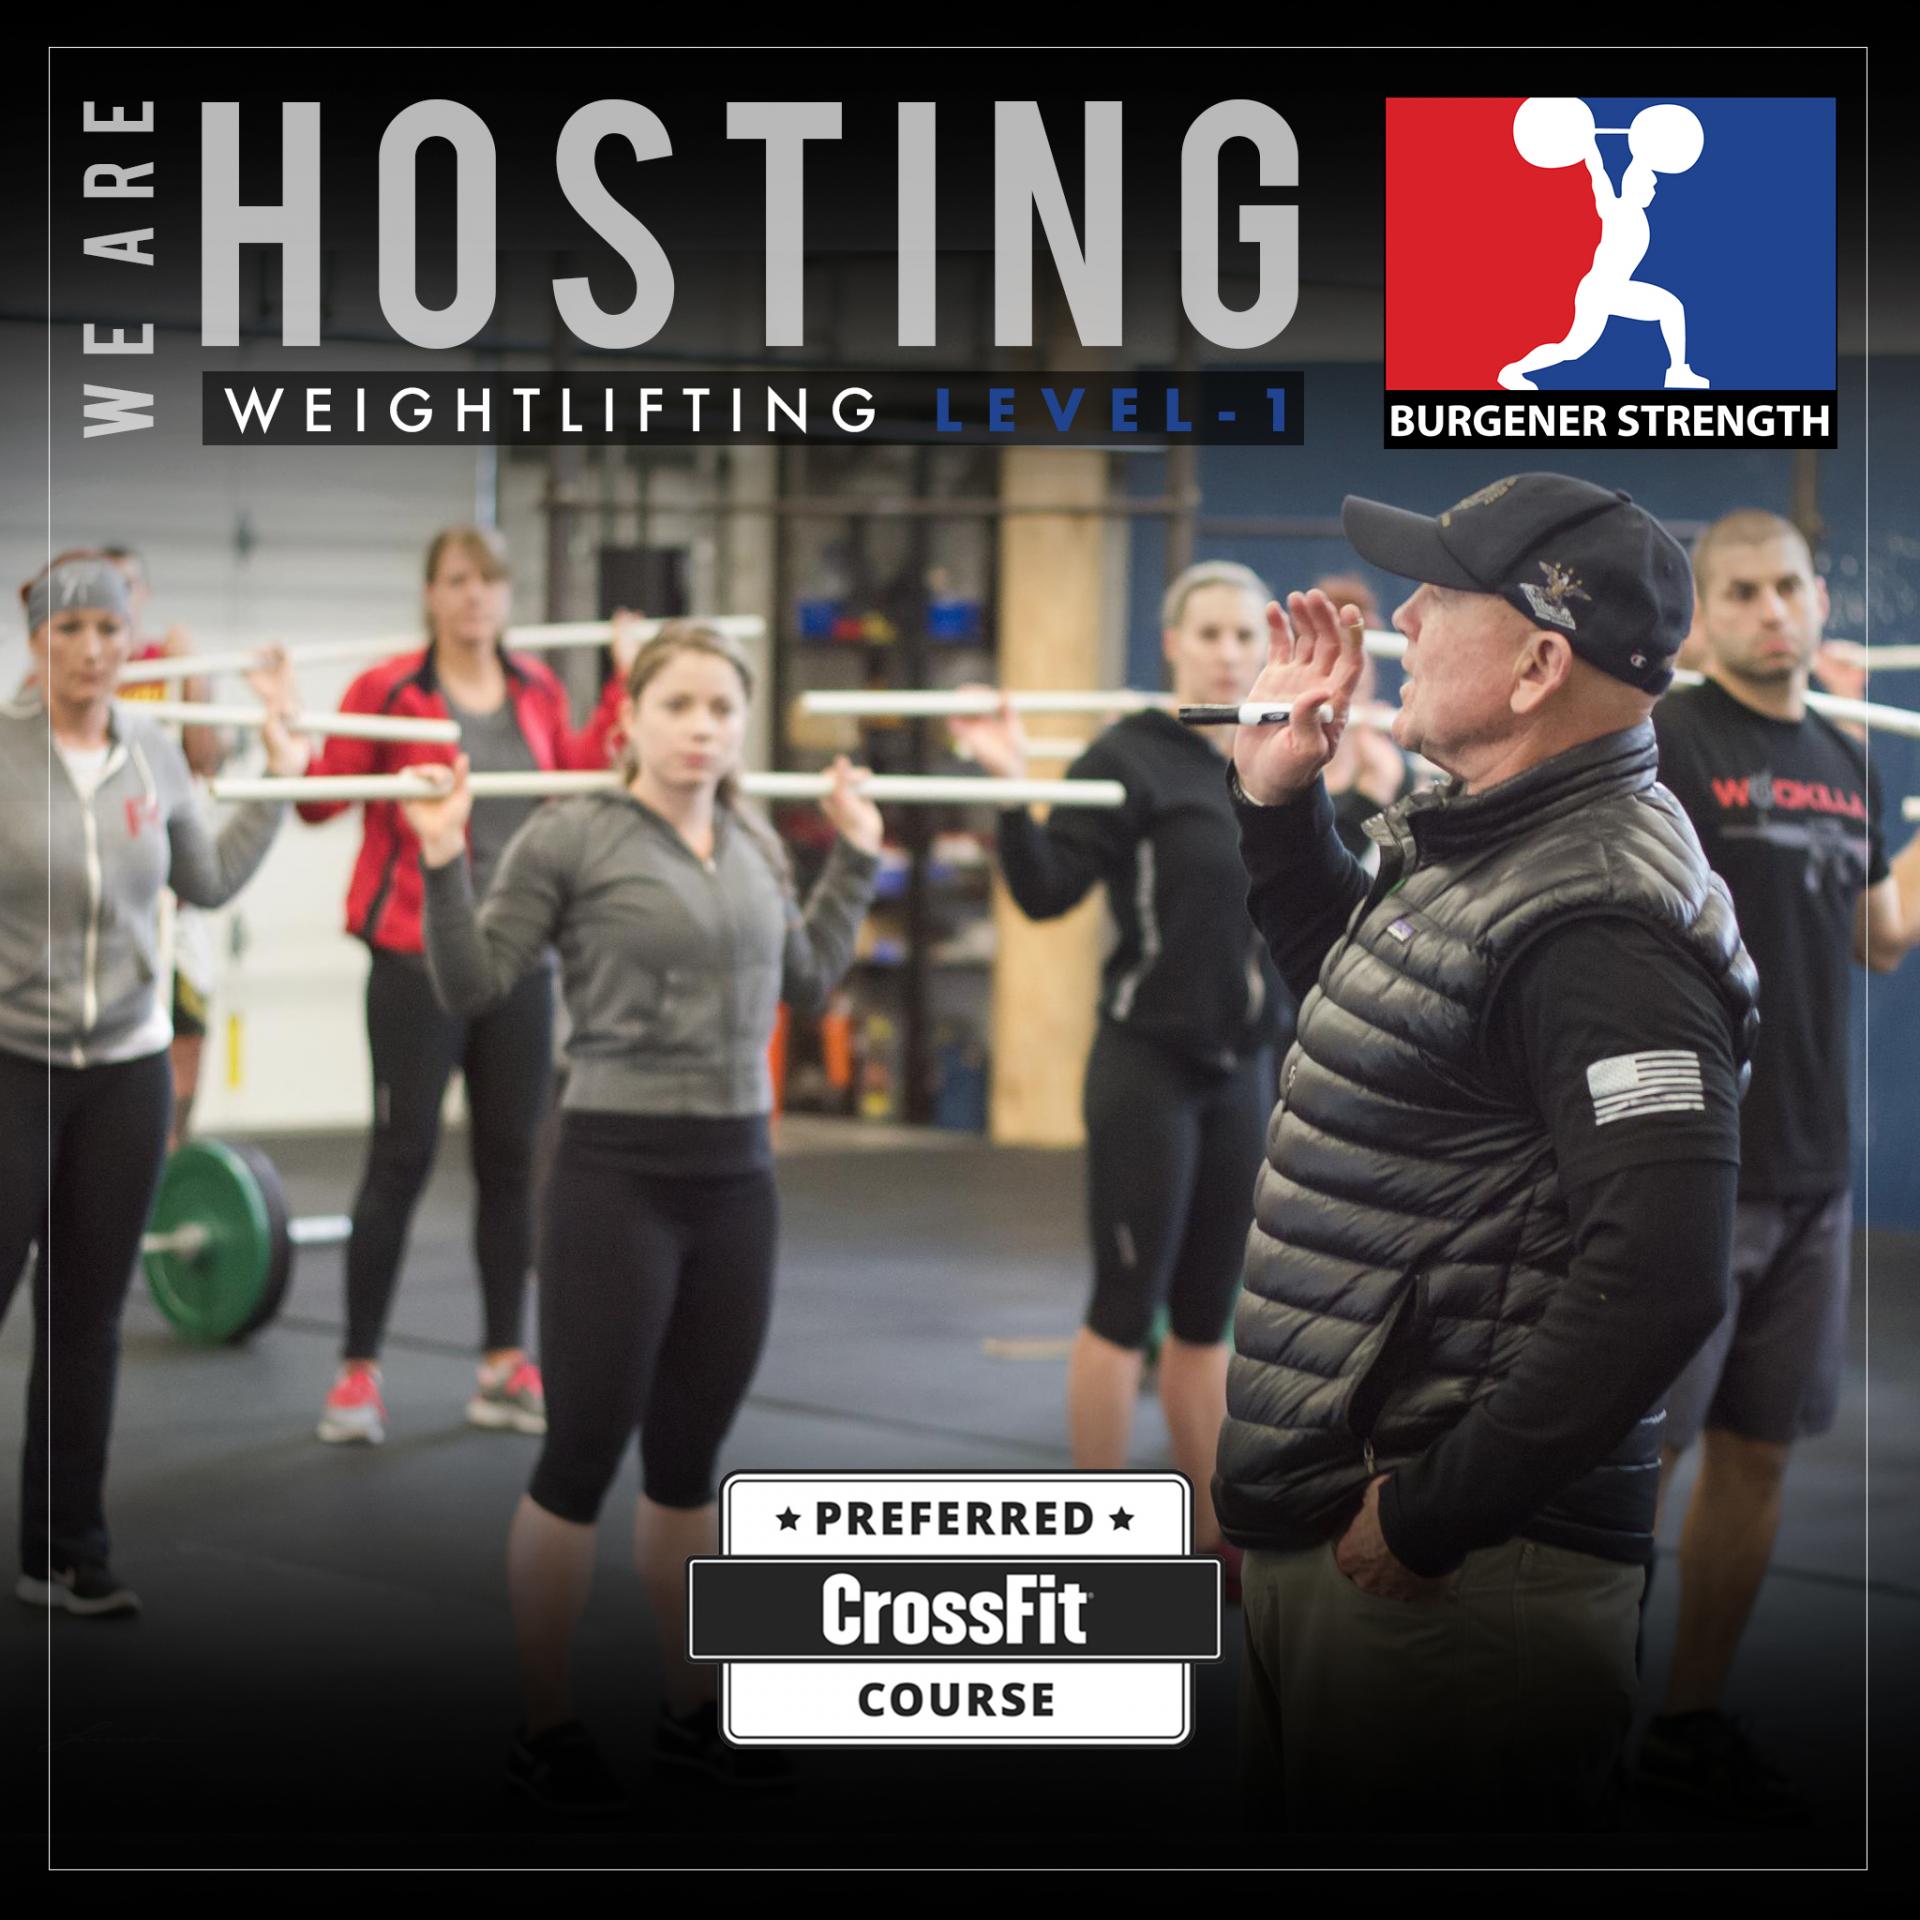 CrossFit® Preferred course: Burgener Strength Weightlifting Level 1